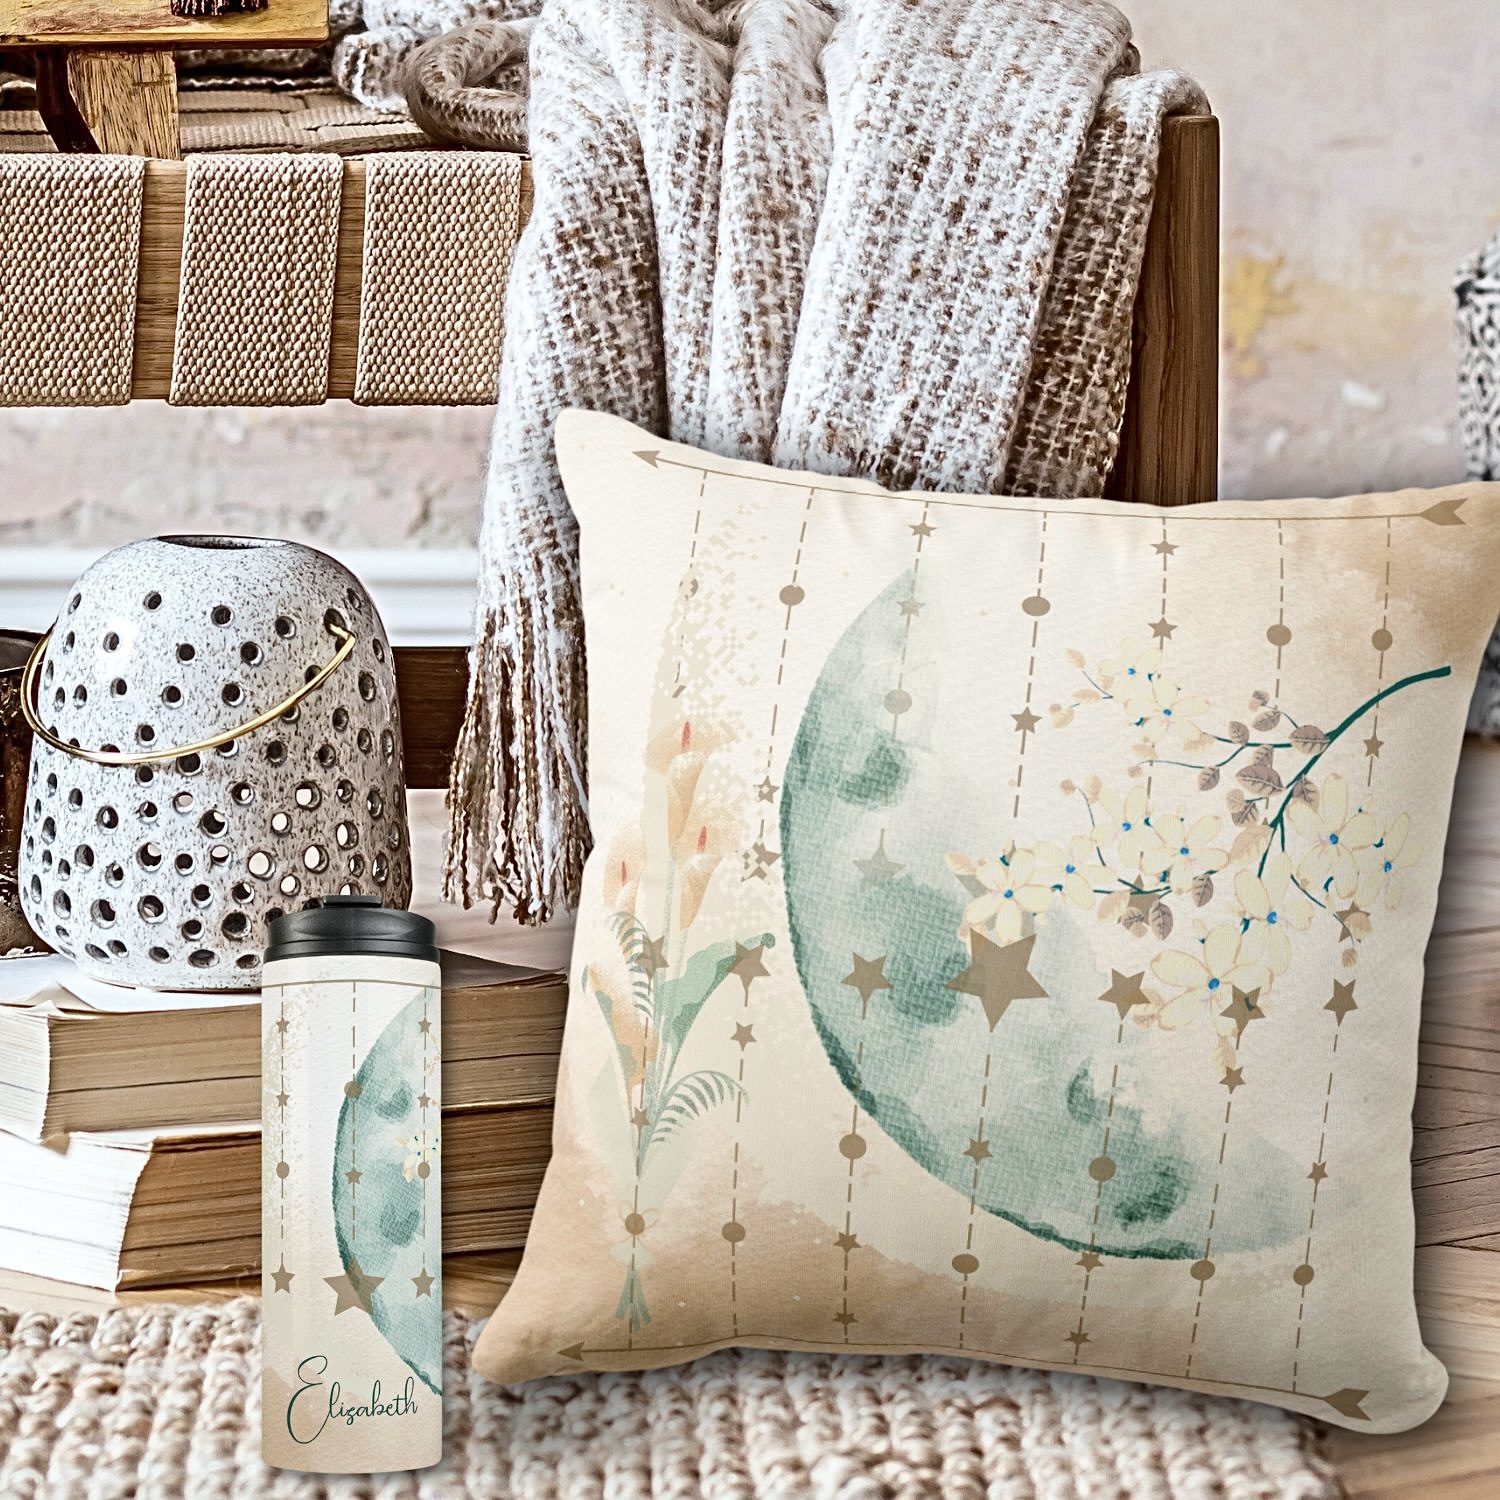 Tranquil Moonlit Flowers Thermal Tumbler and Throw Pillow: Earthy tones and delicate florals adorn these serene essentials.